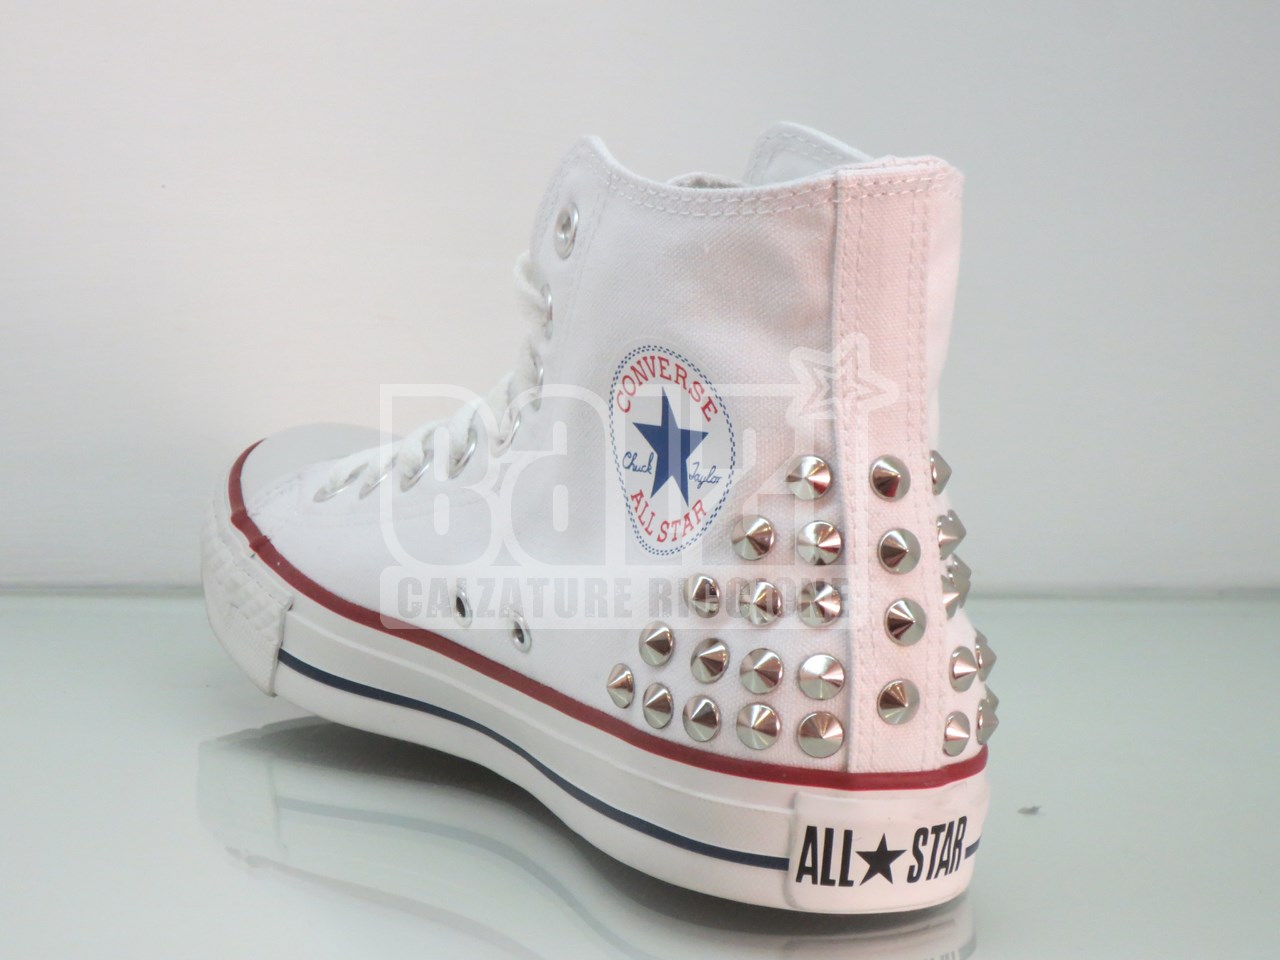 Converse Alte Bianche Con Borchie Hotsell, 54% OFF | lagence.tv رز الوليمة ١٠ كيلو